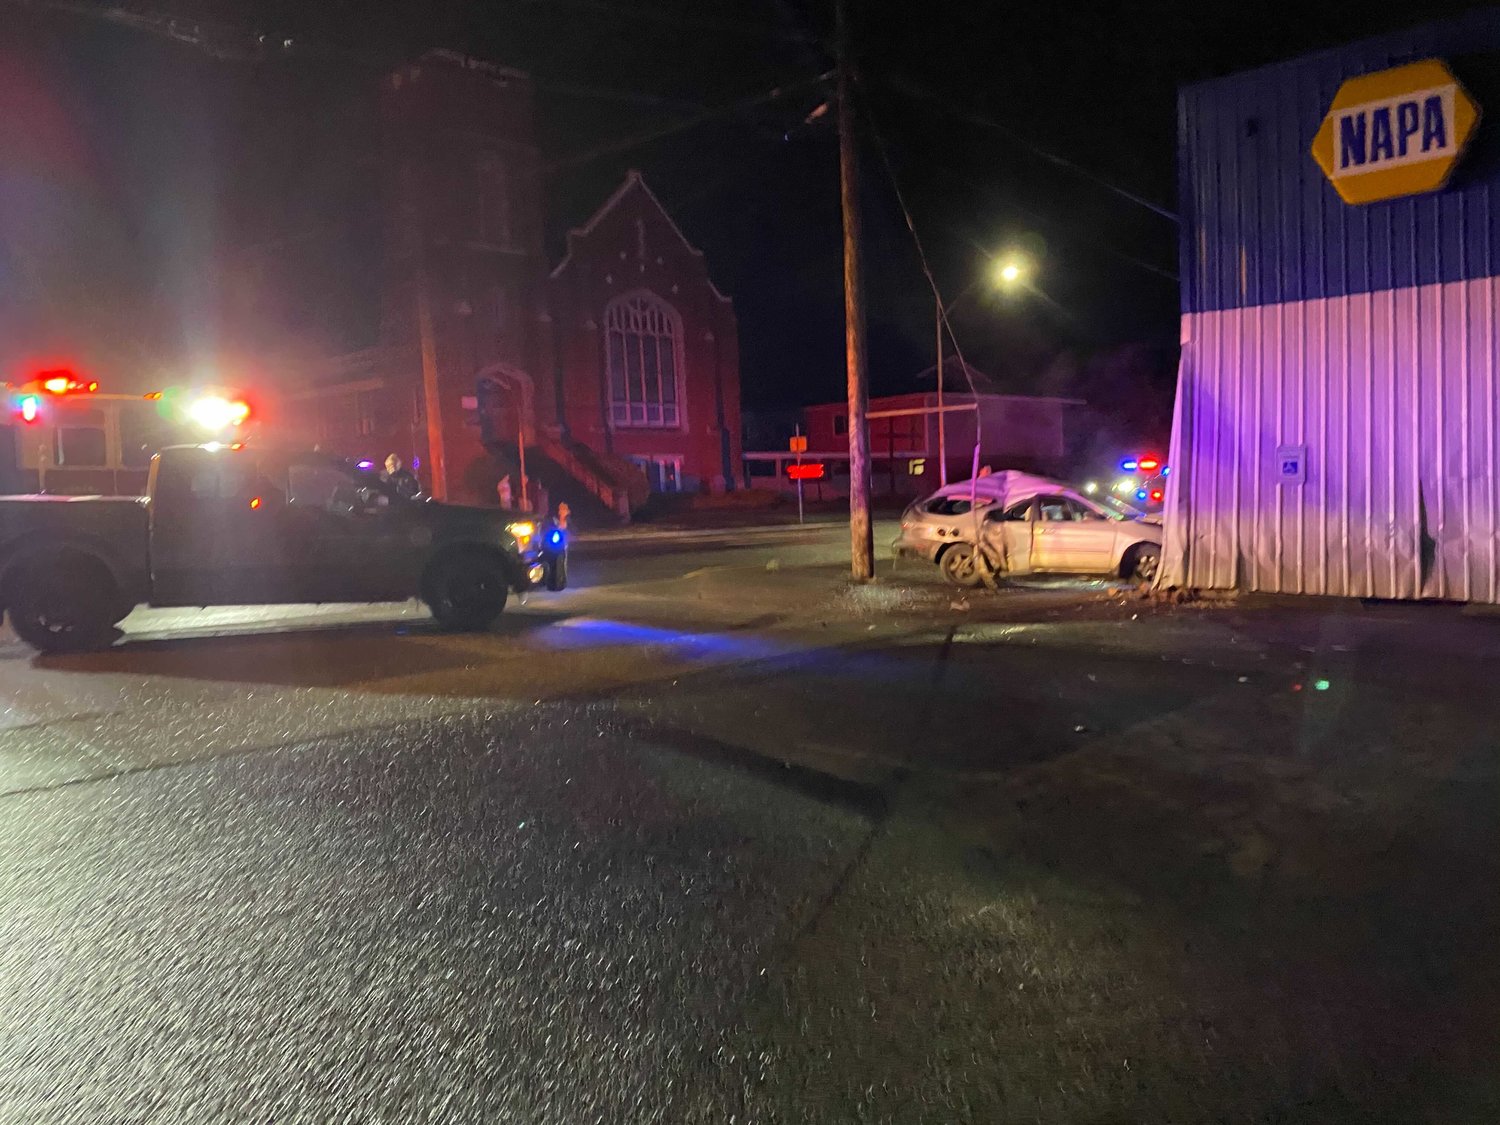 An Olympia man was arrested after high-speed police pursuit ended with the suspect’s vehicle striking the NAPA Auto Parts building in downtown Chehalis shortly after midnight on Tuesday. 